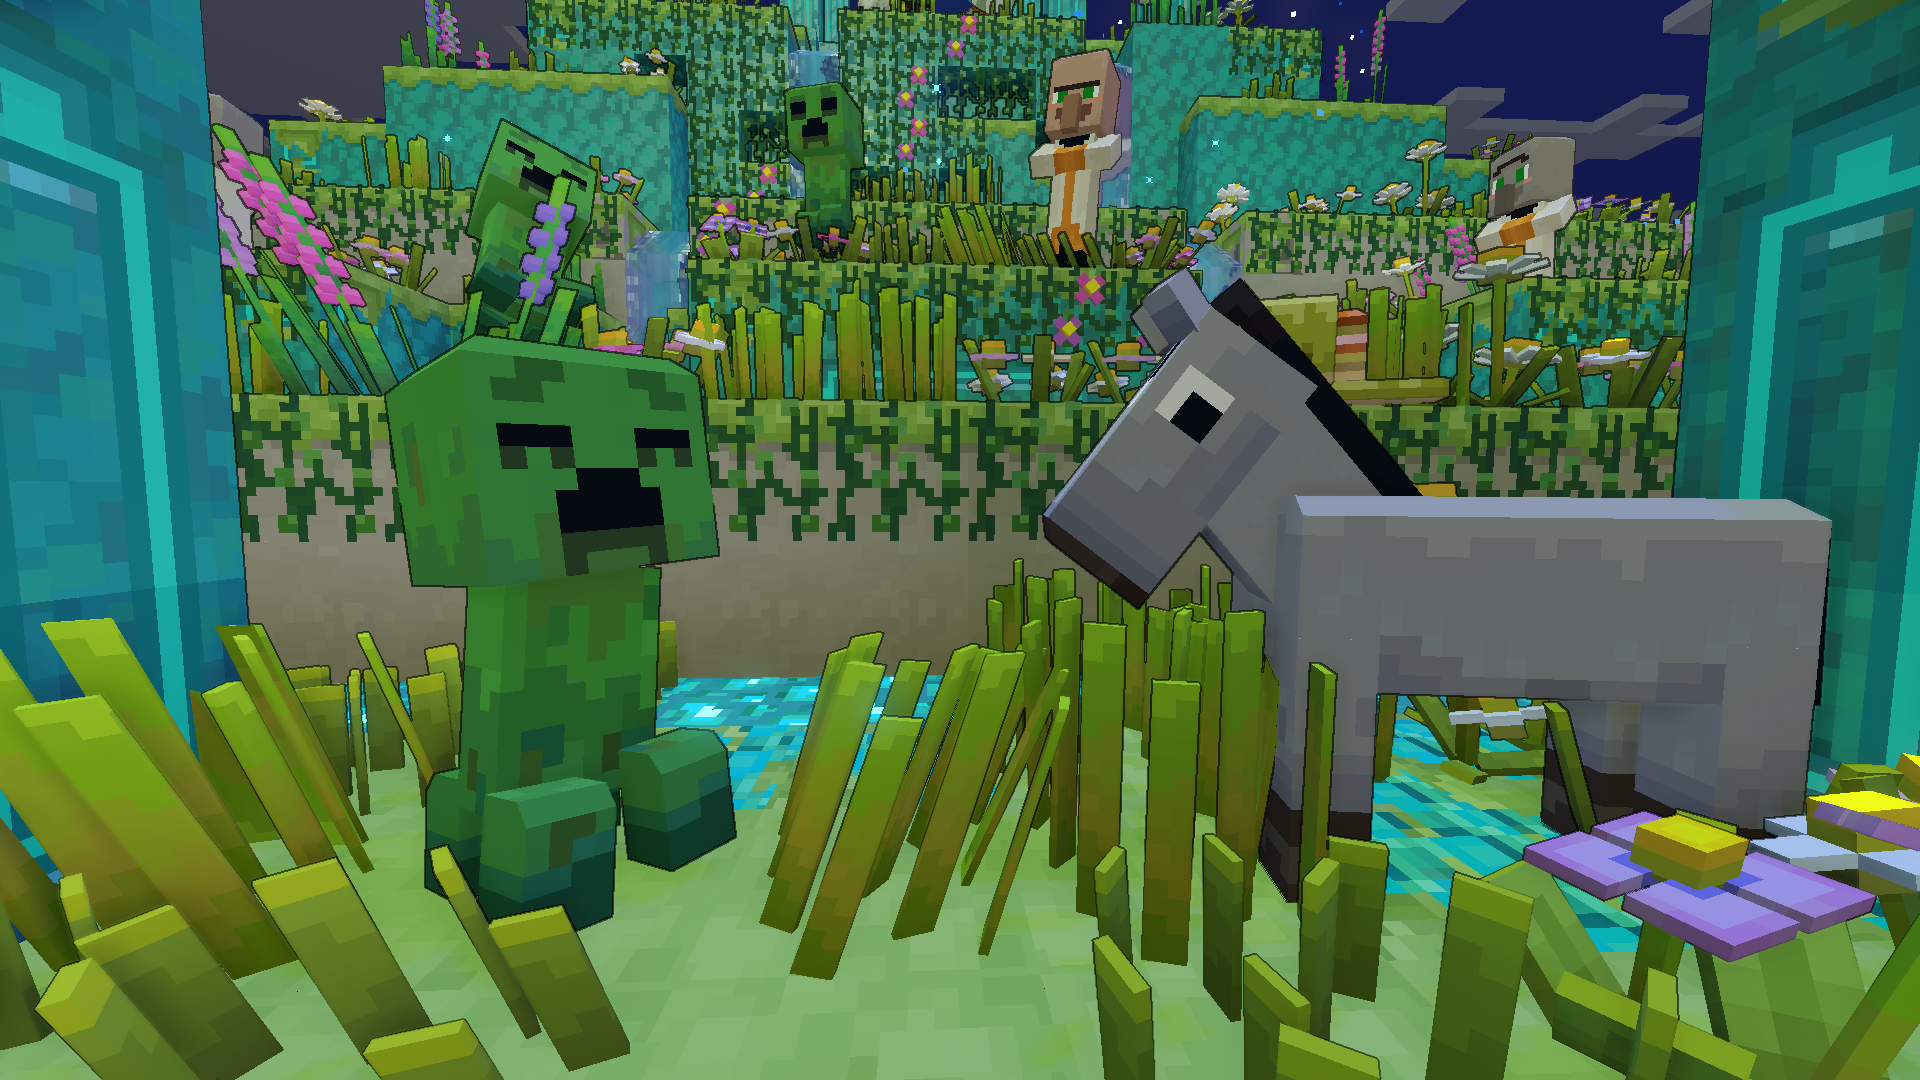 Minecraft Legends is a new action strategy game spin-off